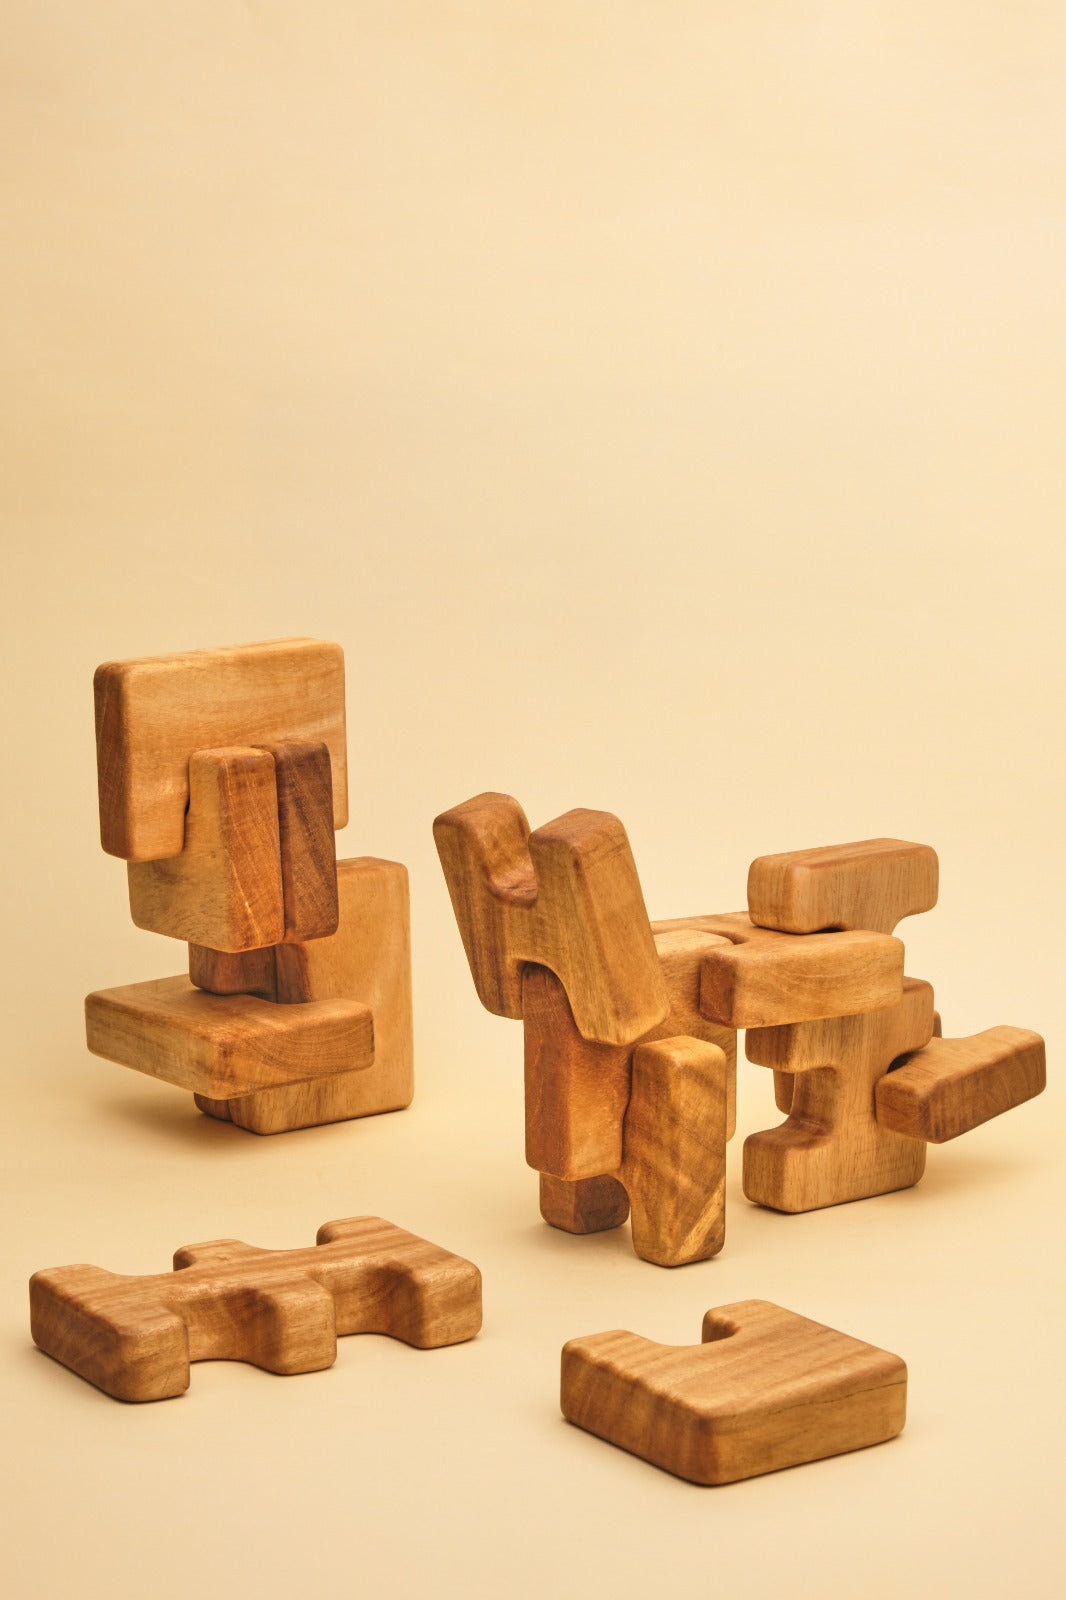 Wooden Stacker Toys: A Timeless Playtime Classic